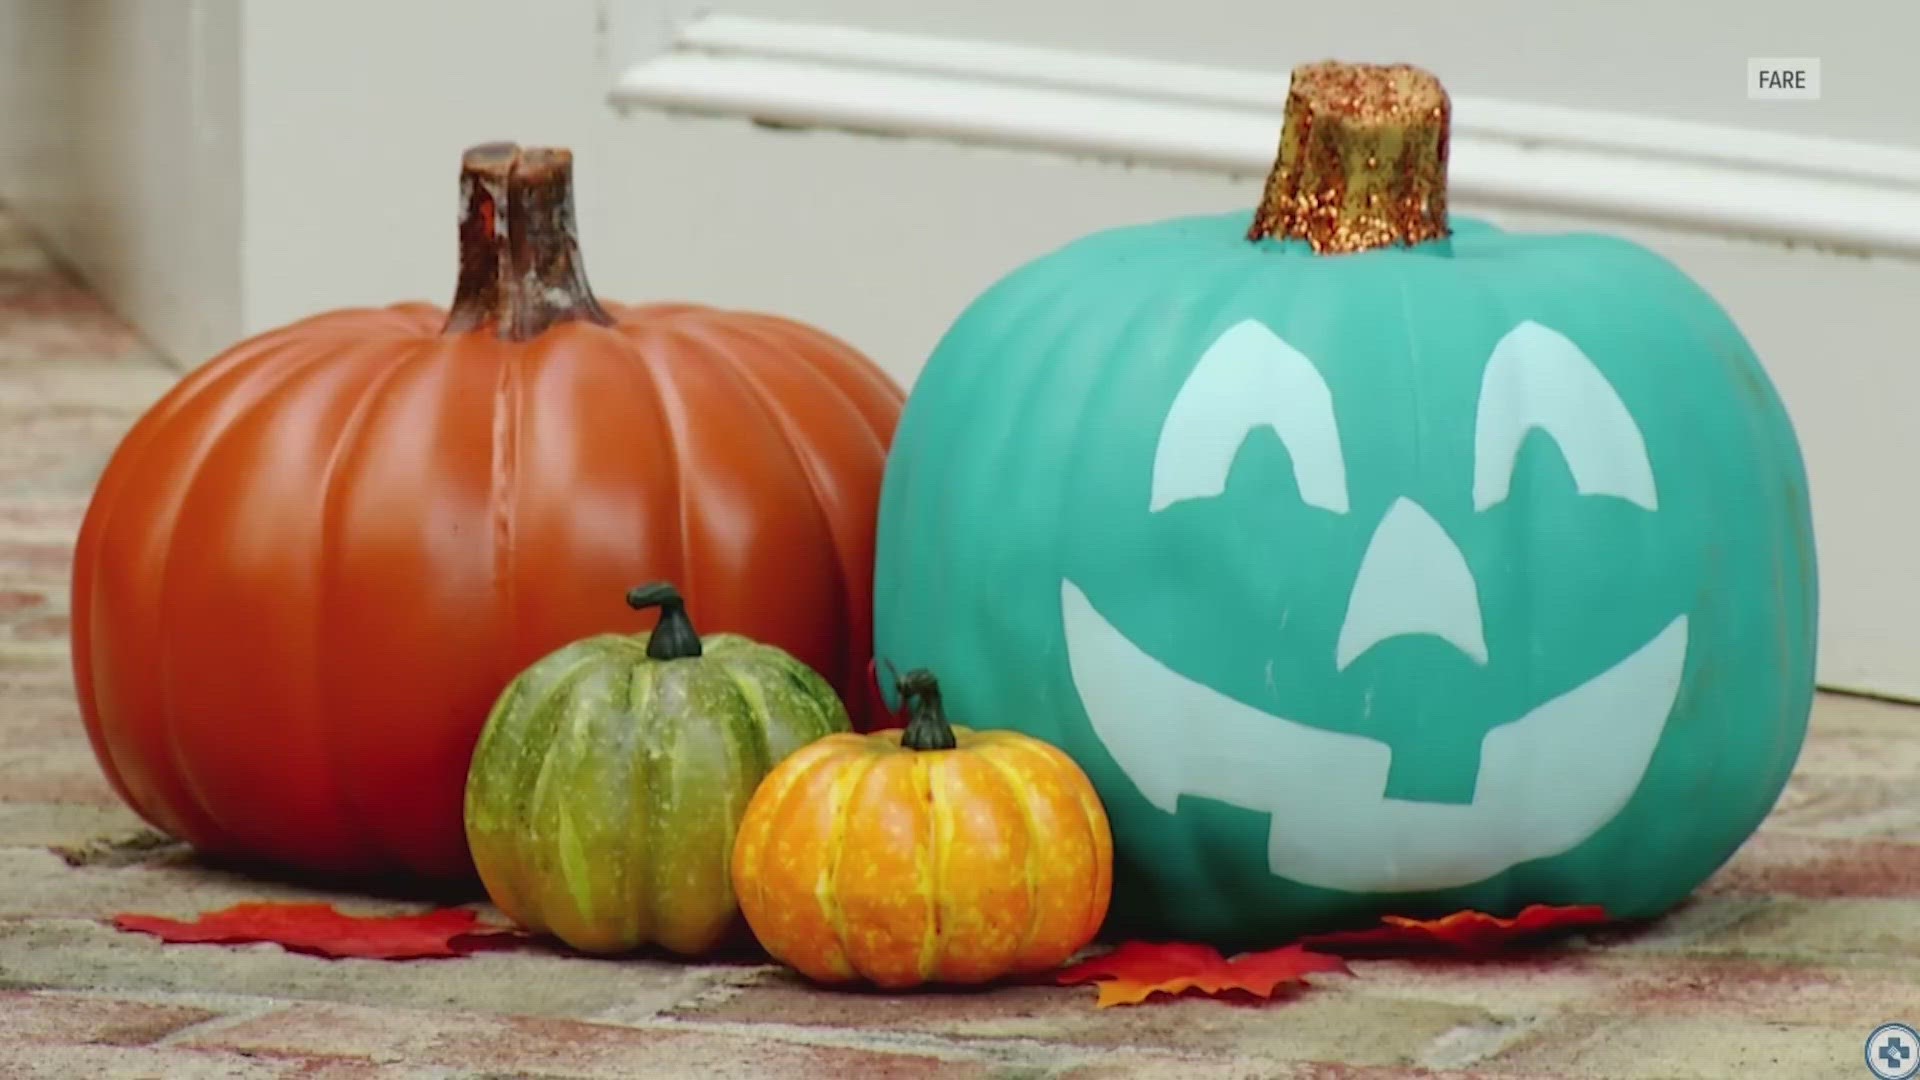 How teal pumpkins are creating a more inclusive Halloween for all